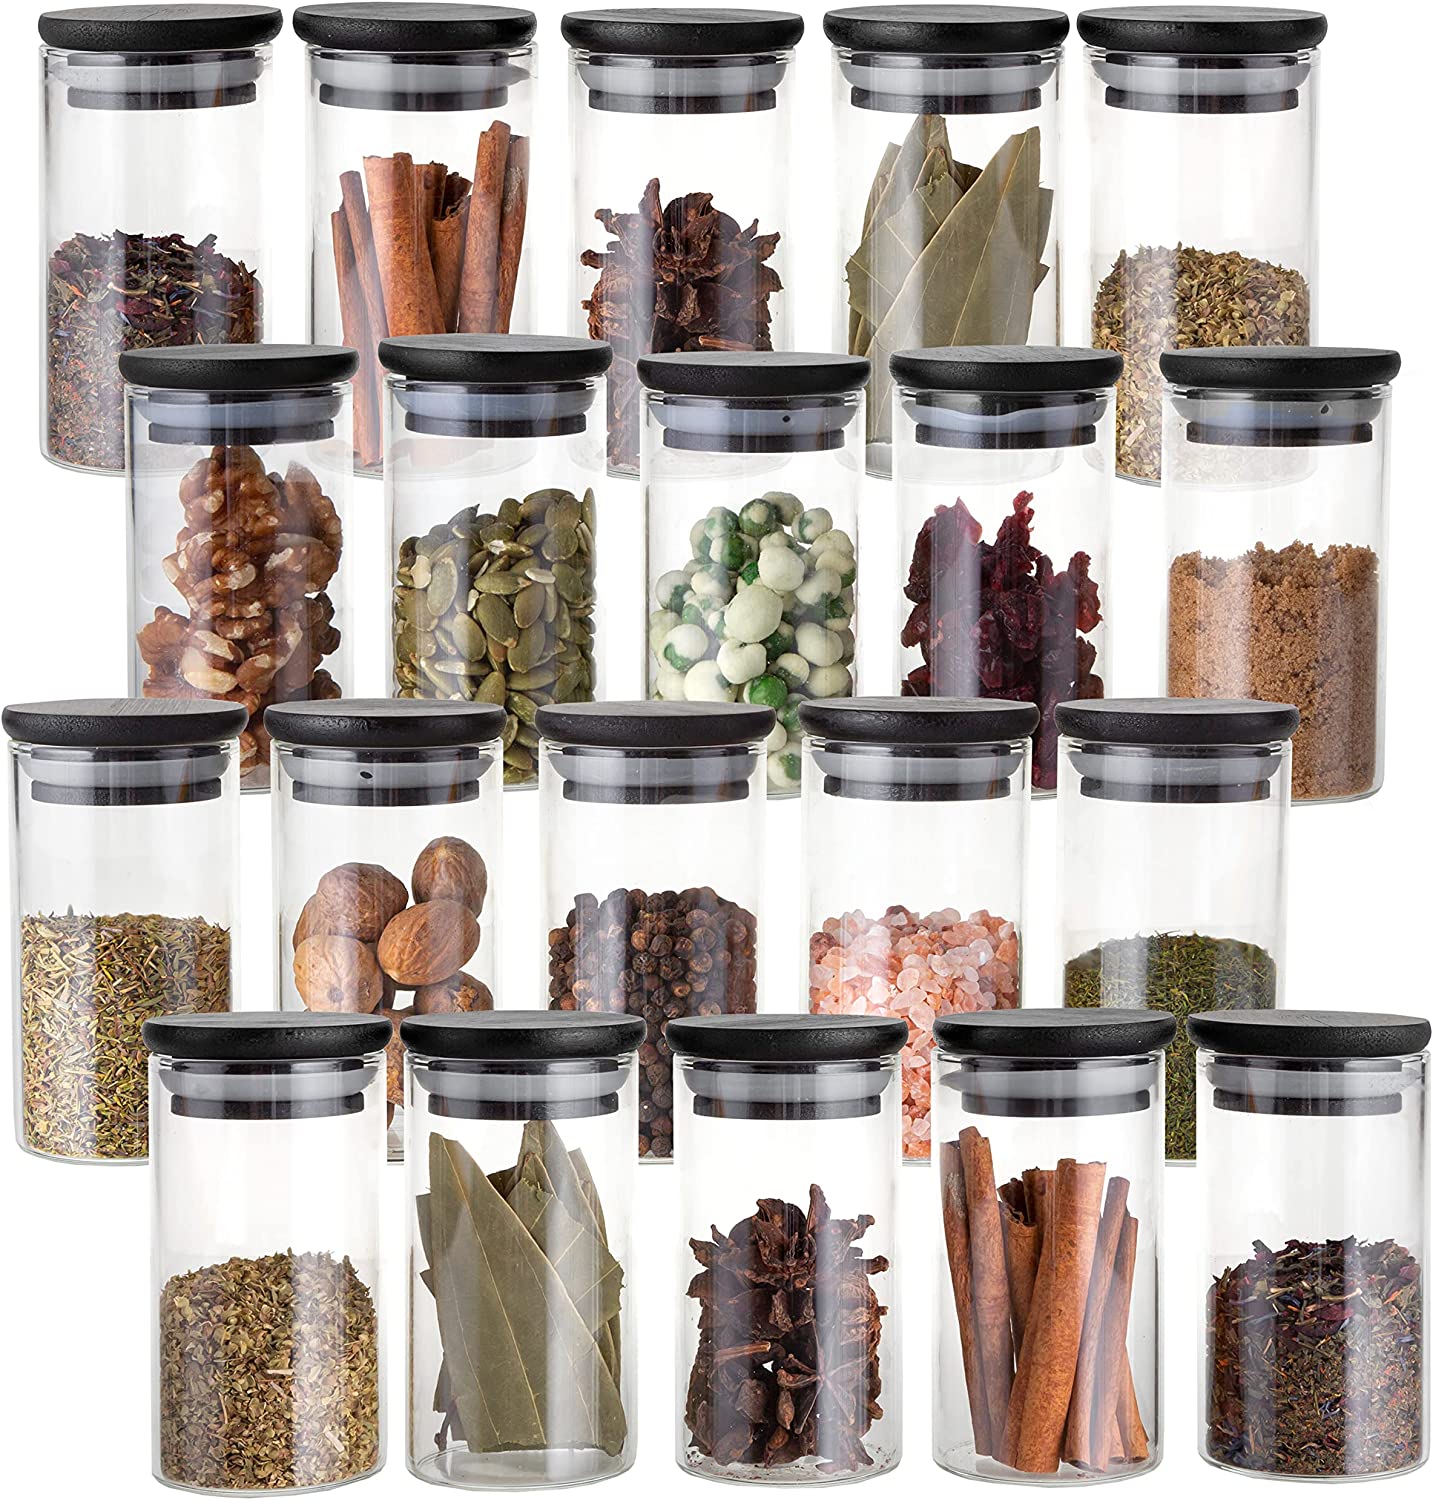 Crutello 20 Pack 4 Oz Spice Jars with Black Bamboo Lids for Spices, Ho -  crutello